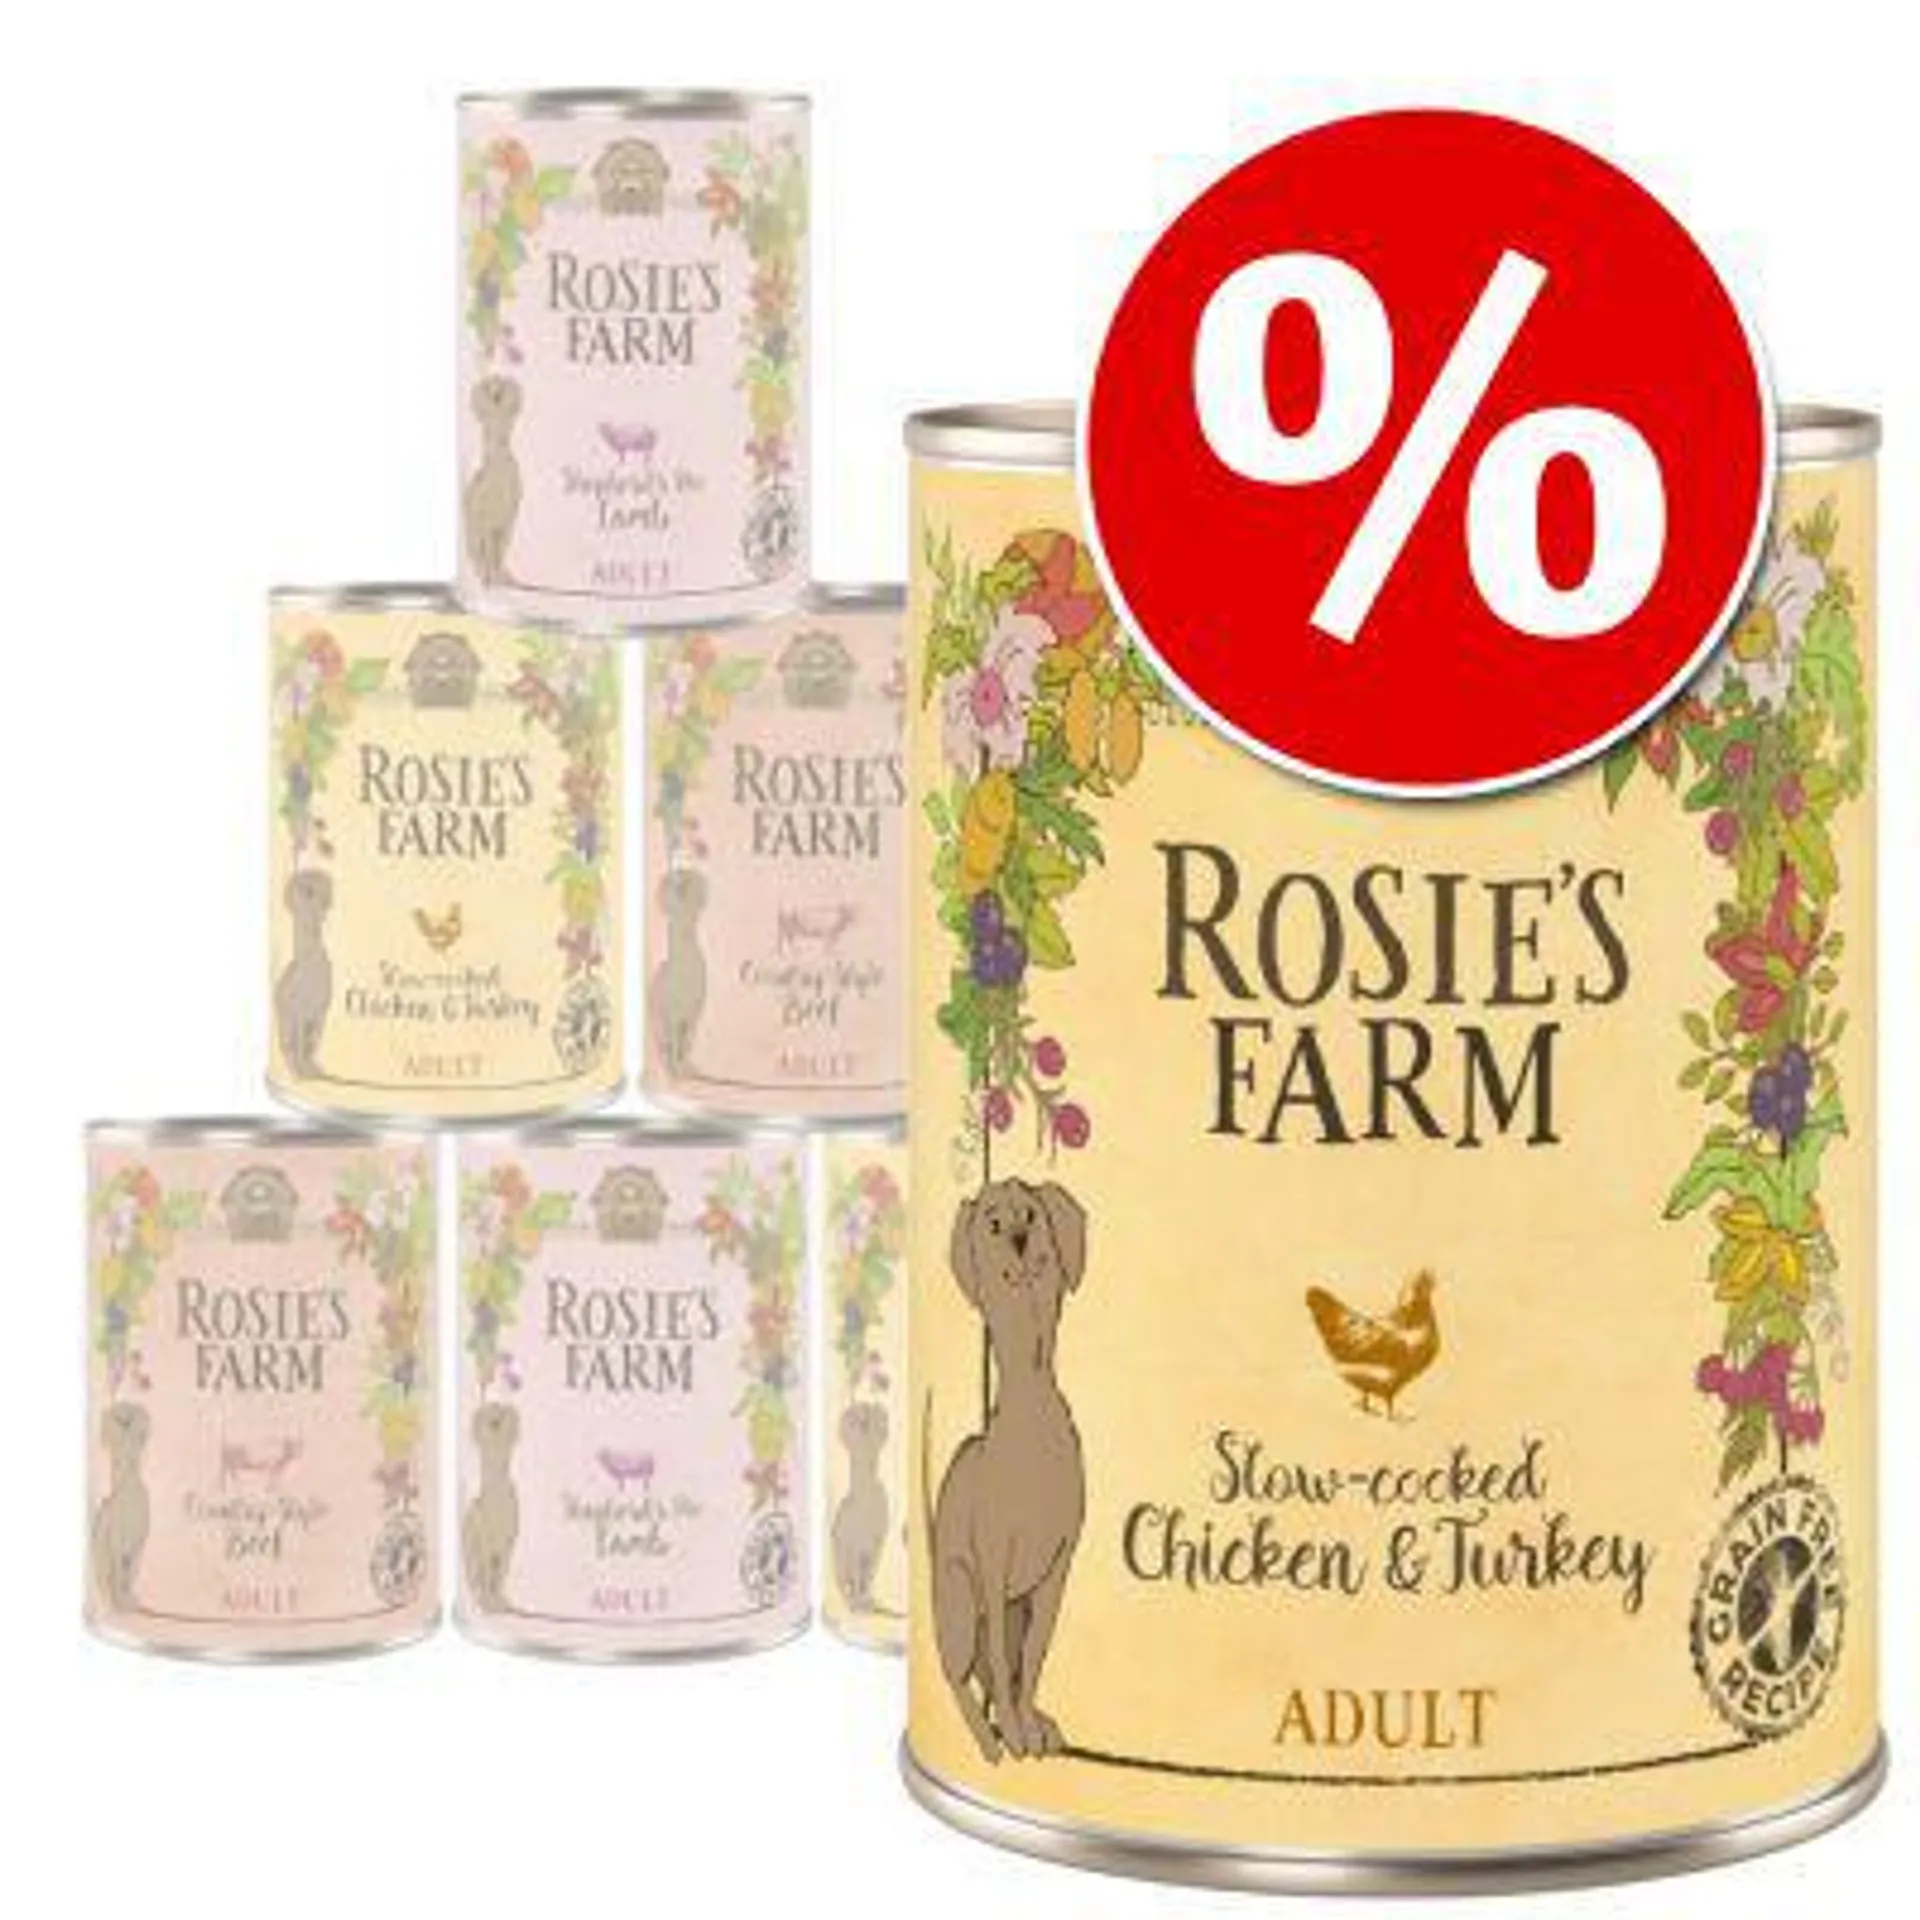 6 x 400g Rosie's Farm Mixed Trial Packs Wet Dog Food - Special Price!*